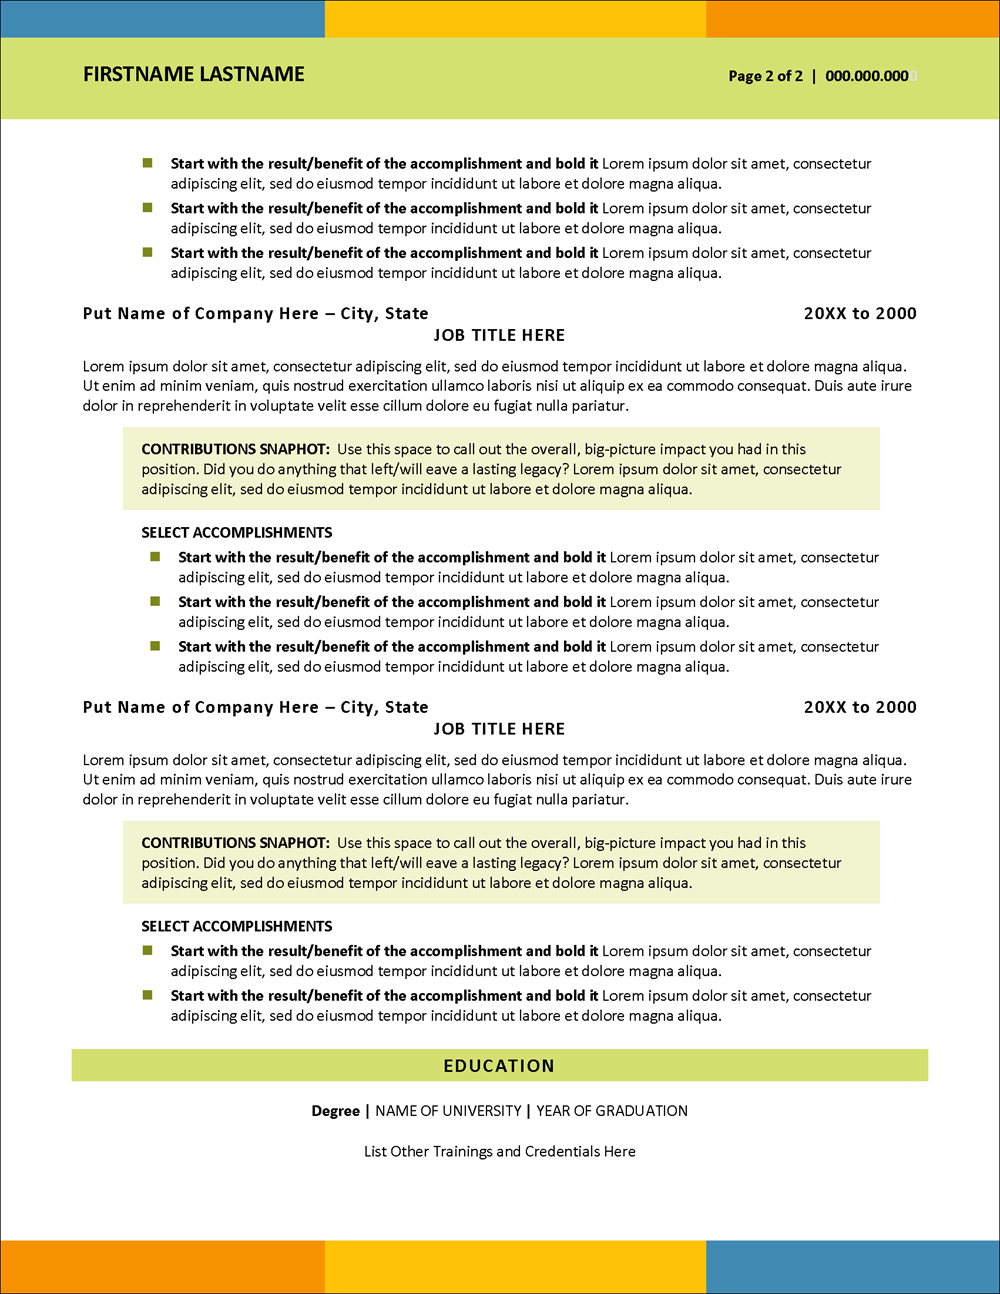 Bright Ambitions Contemporary Resume Template Page 2